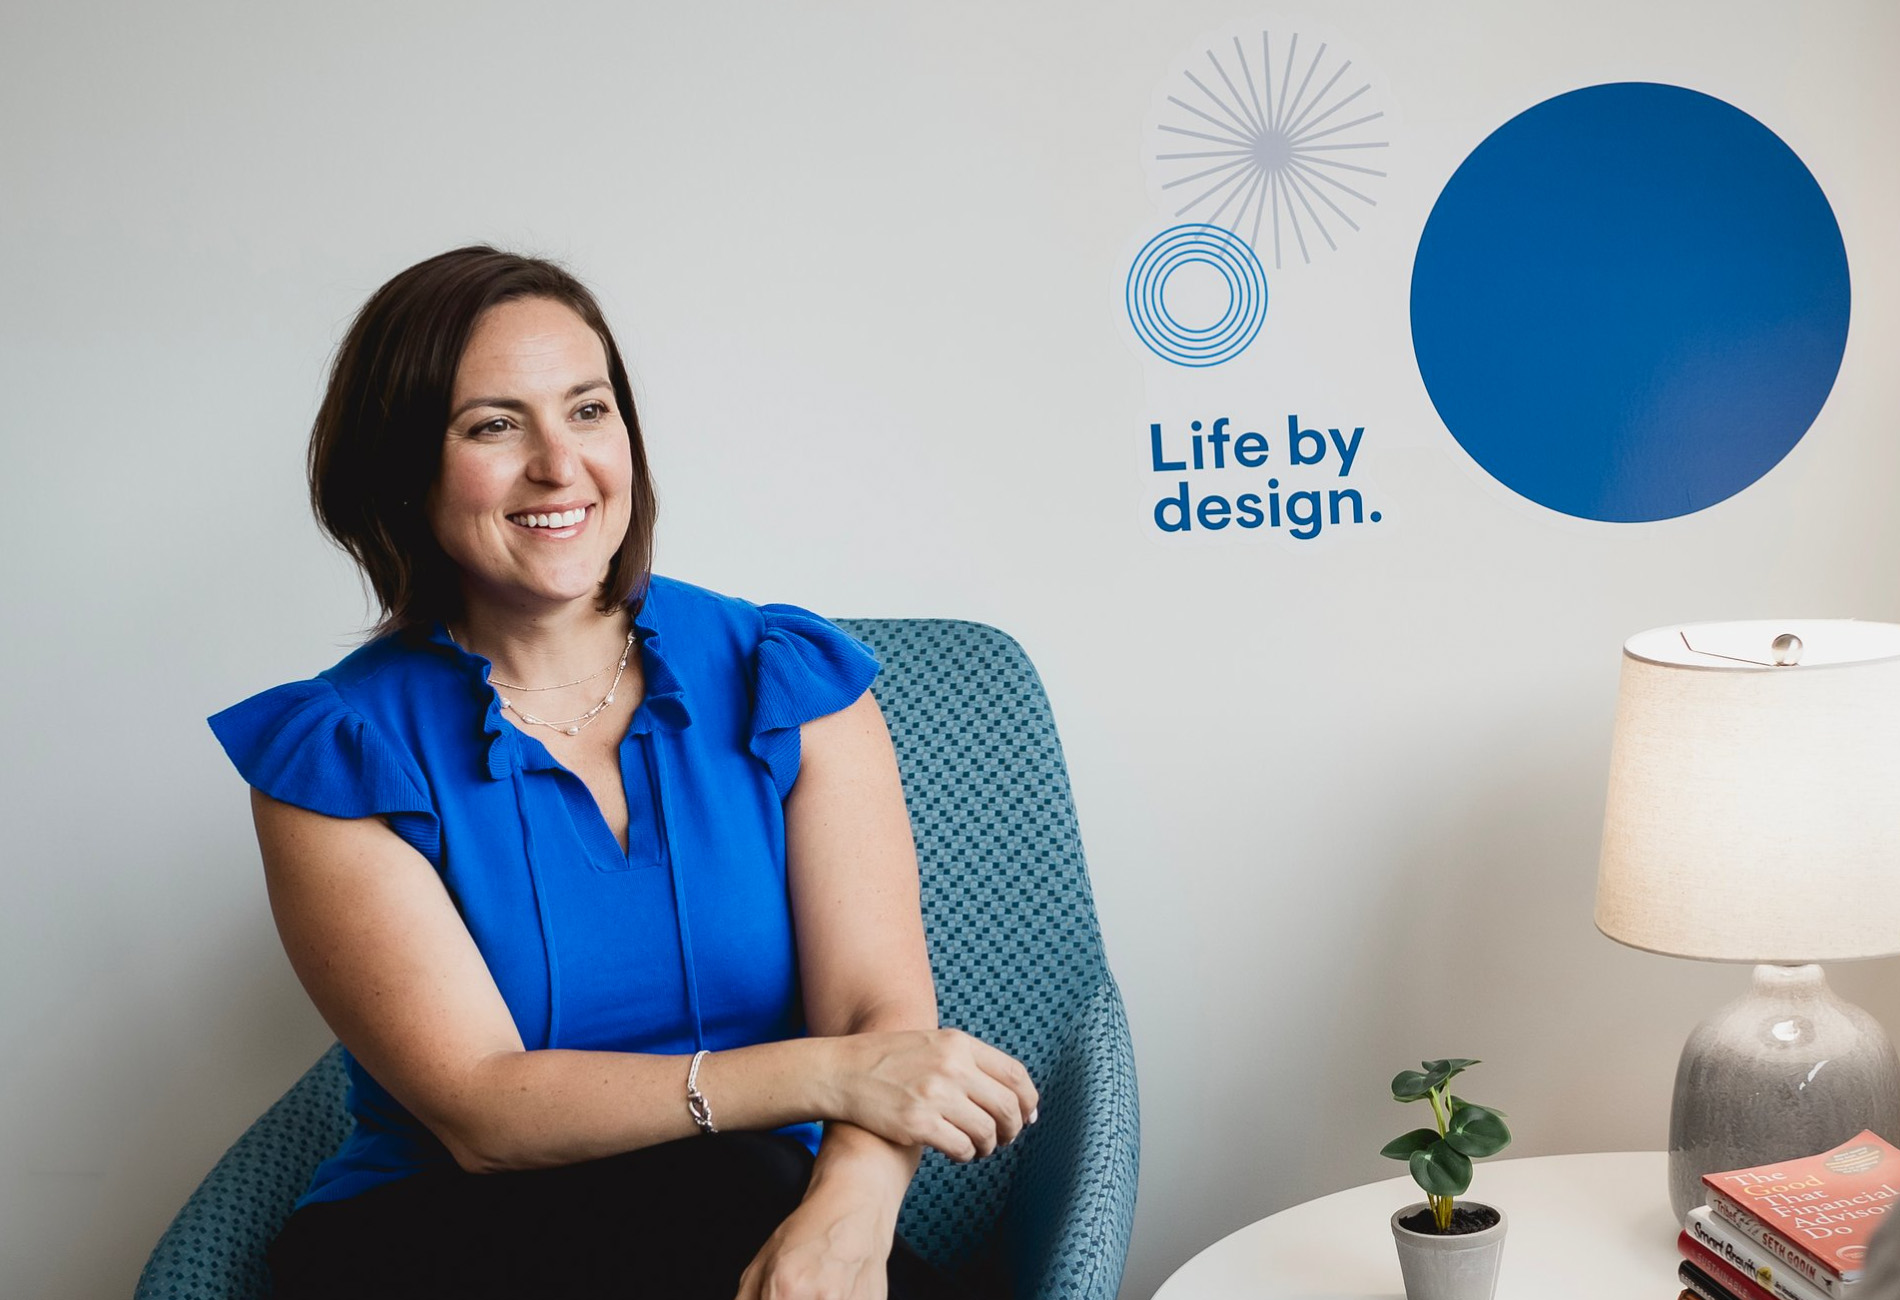 Katy Heintz, Business Development Manager, Wealth Management Leadership Team, Strategic Management Team: A woman with short brown hair wearing a blue shirt sitting in a blue chair against a white wall.